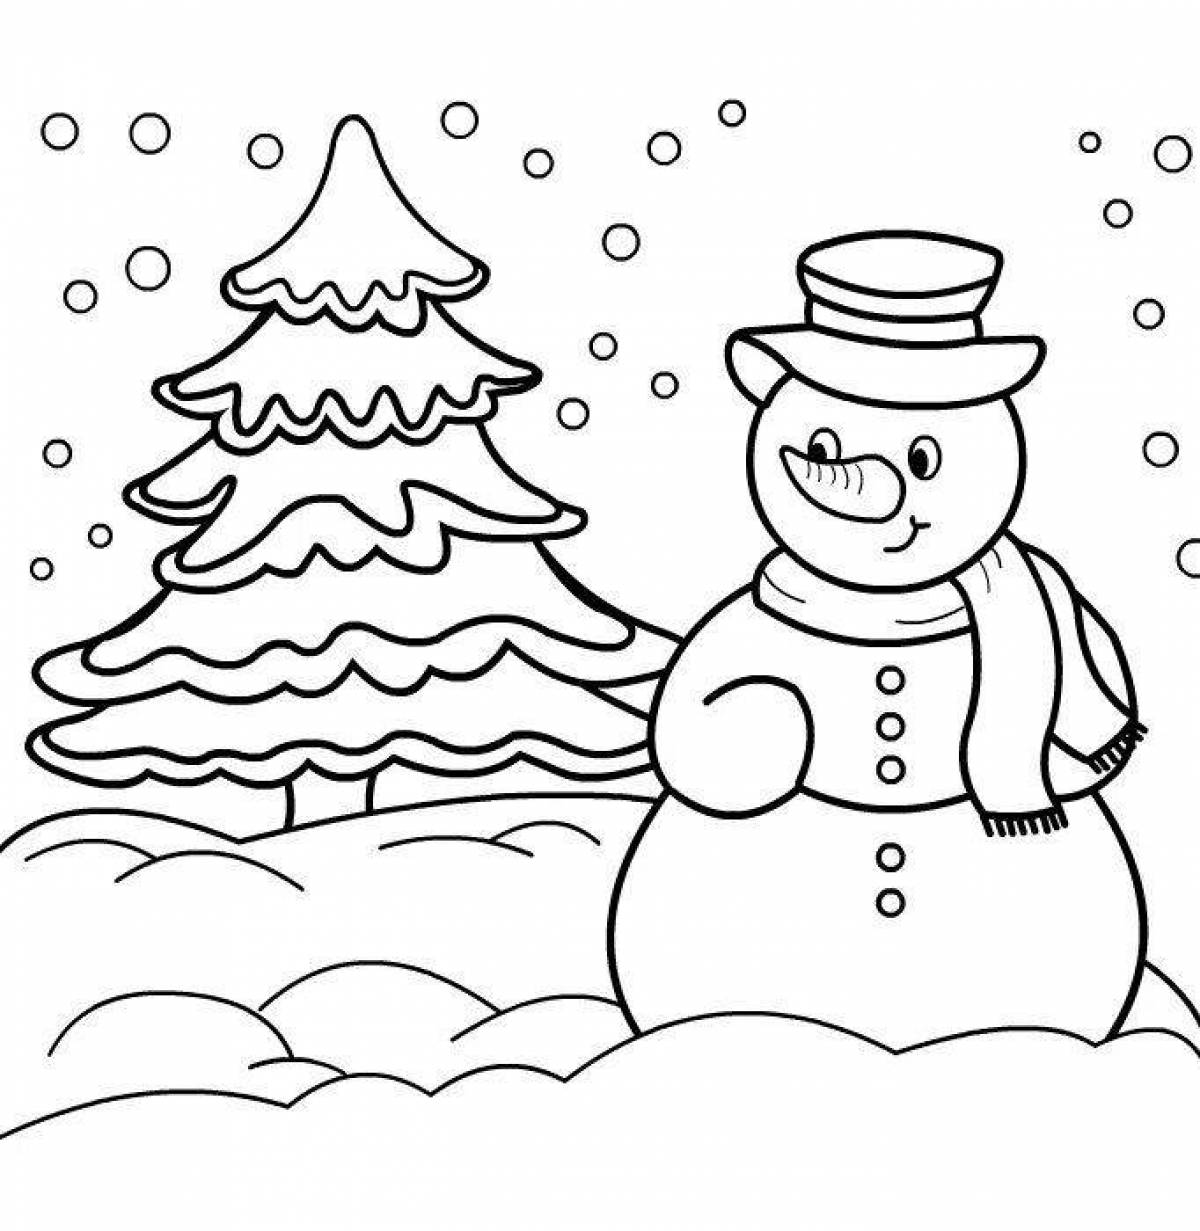 Exquisite snowman coloring book for kids 6-7 years old